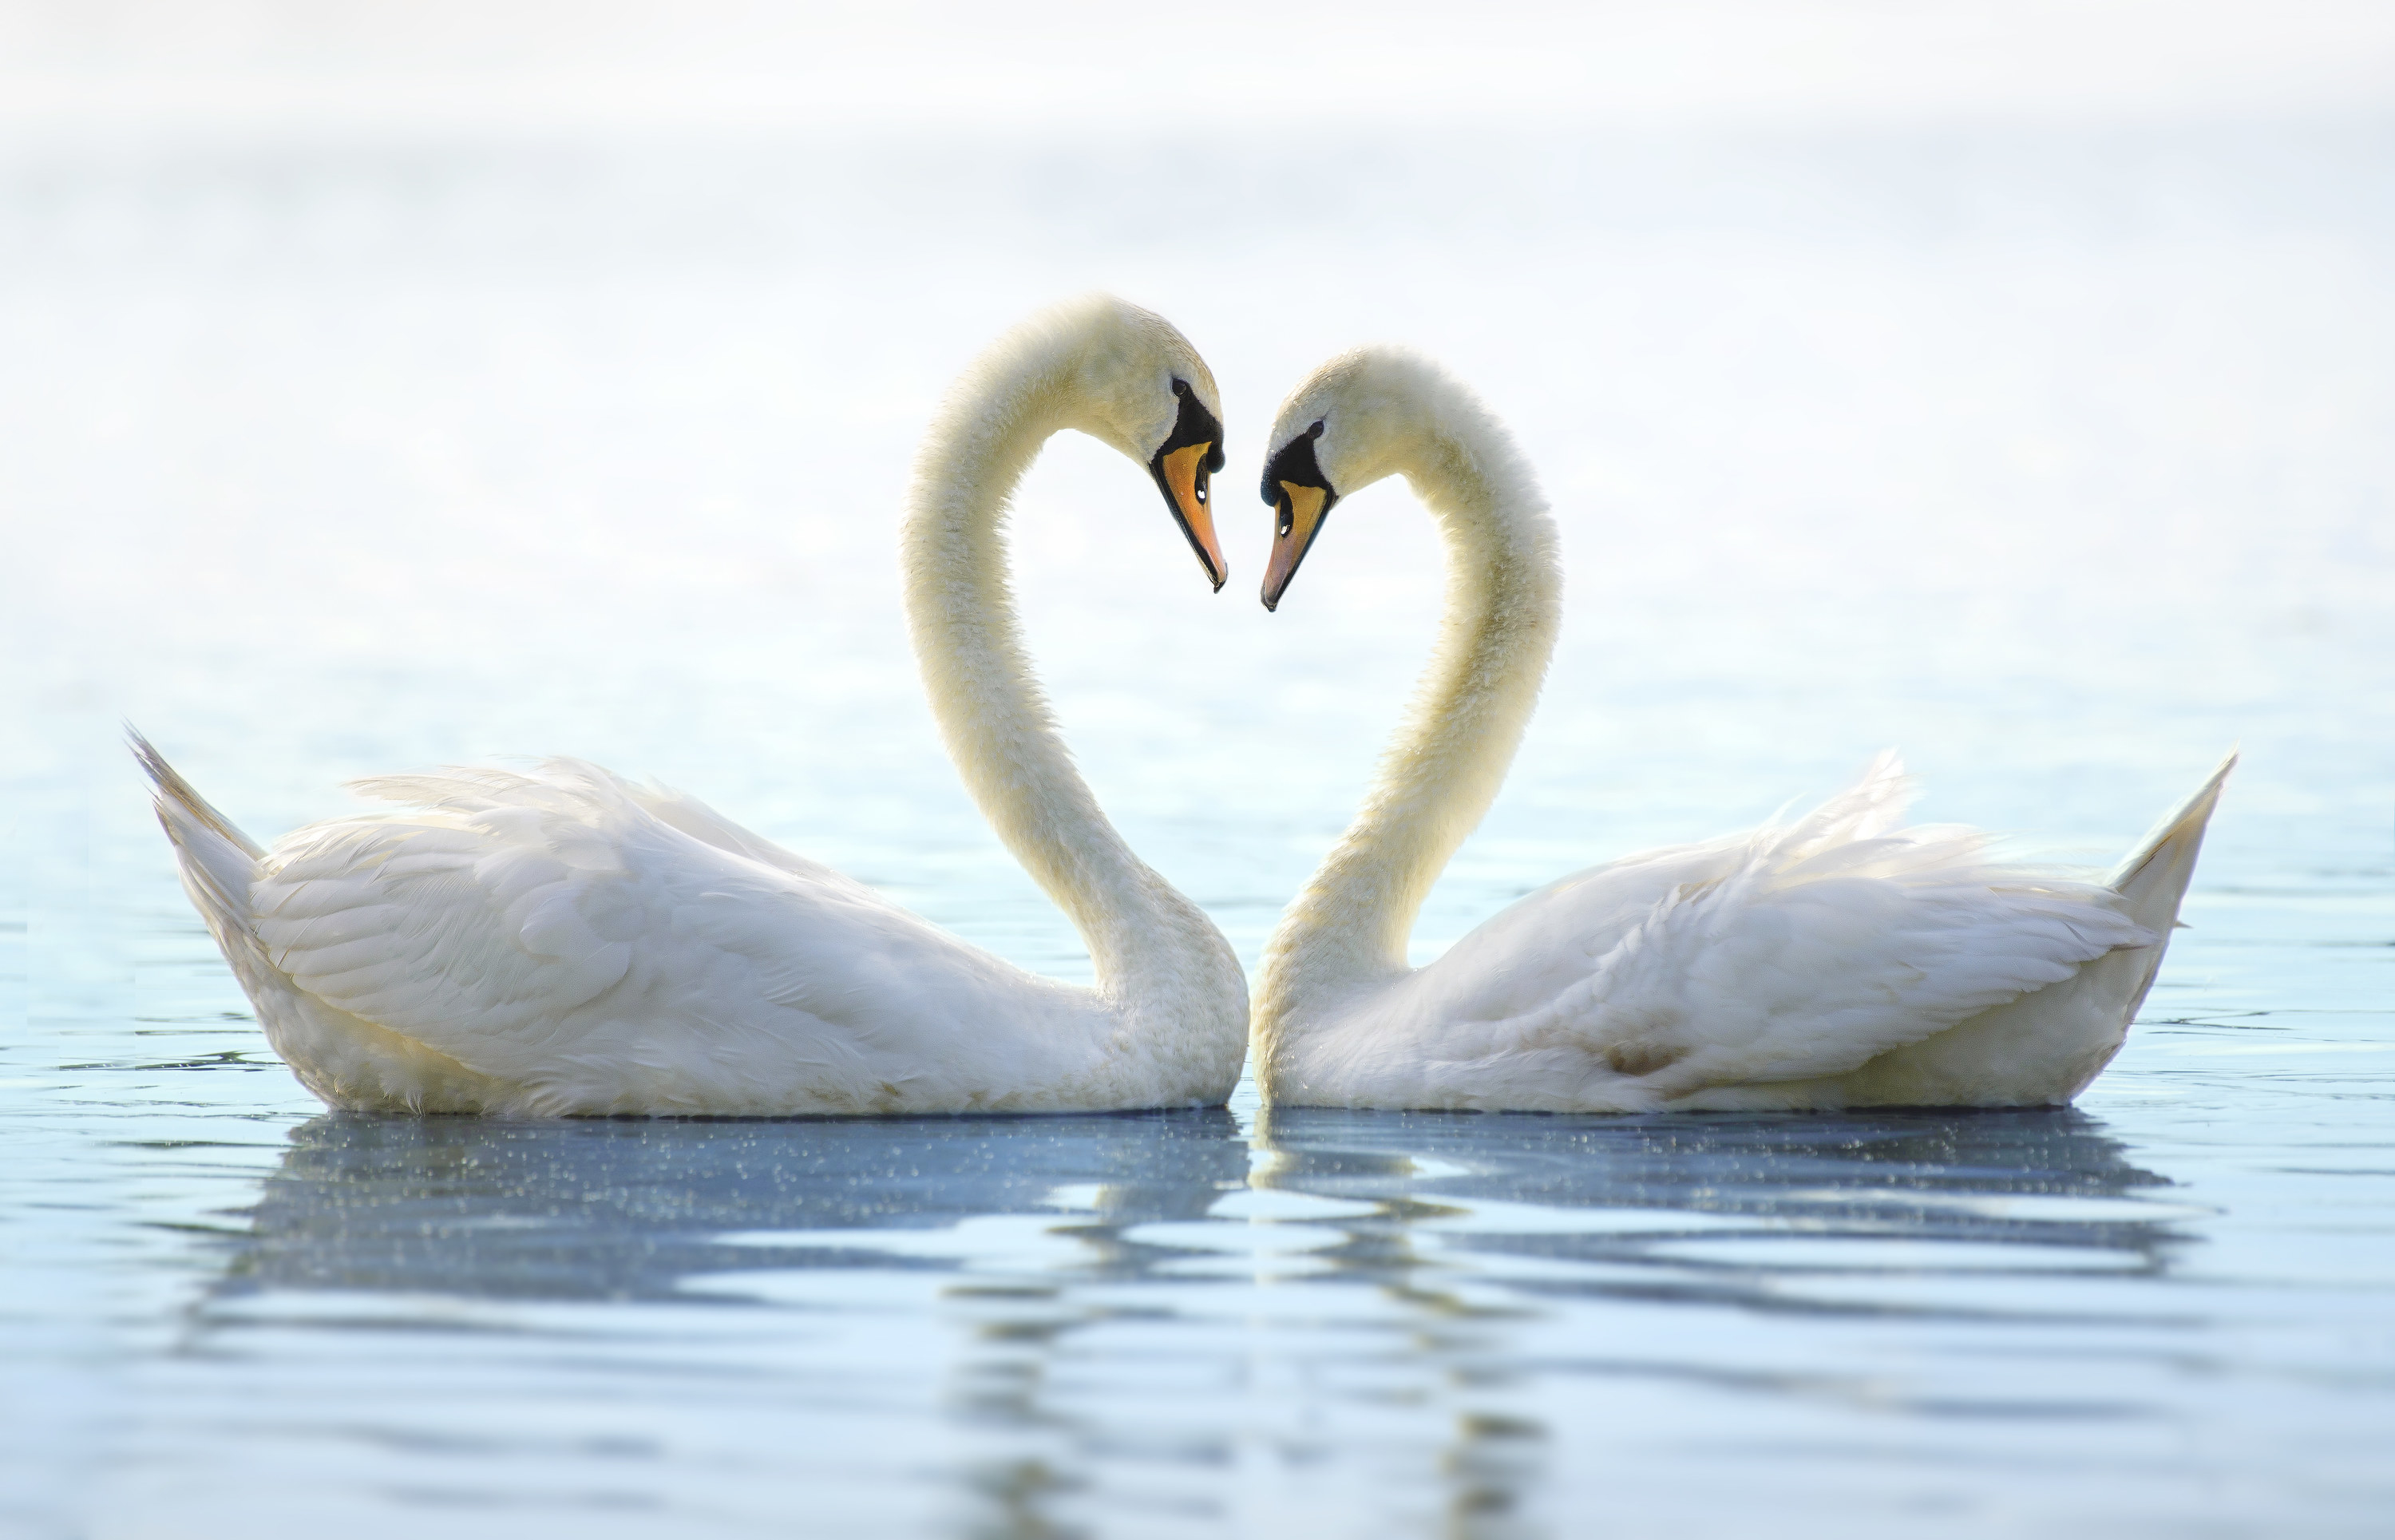 Two swans facing each other with their necks forming a heart